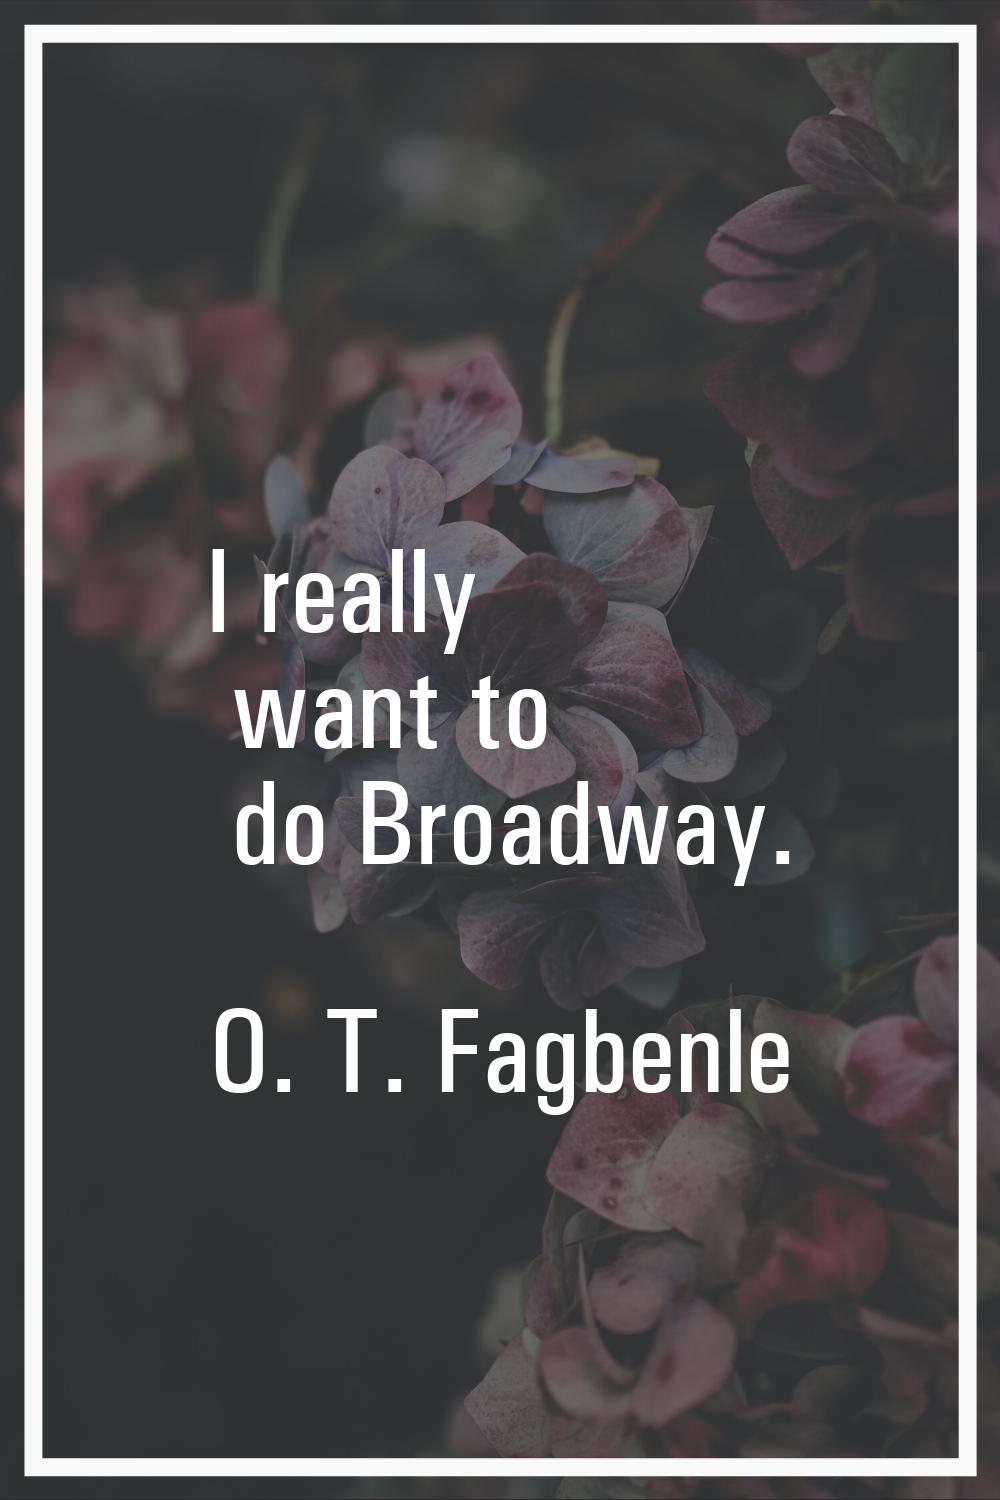 I really want to do Broadway.